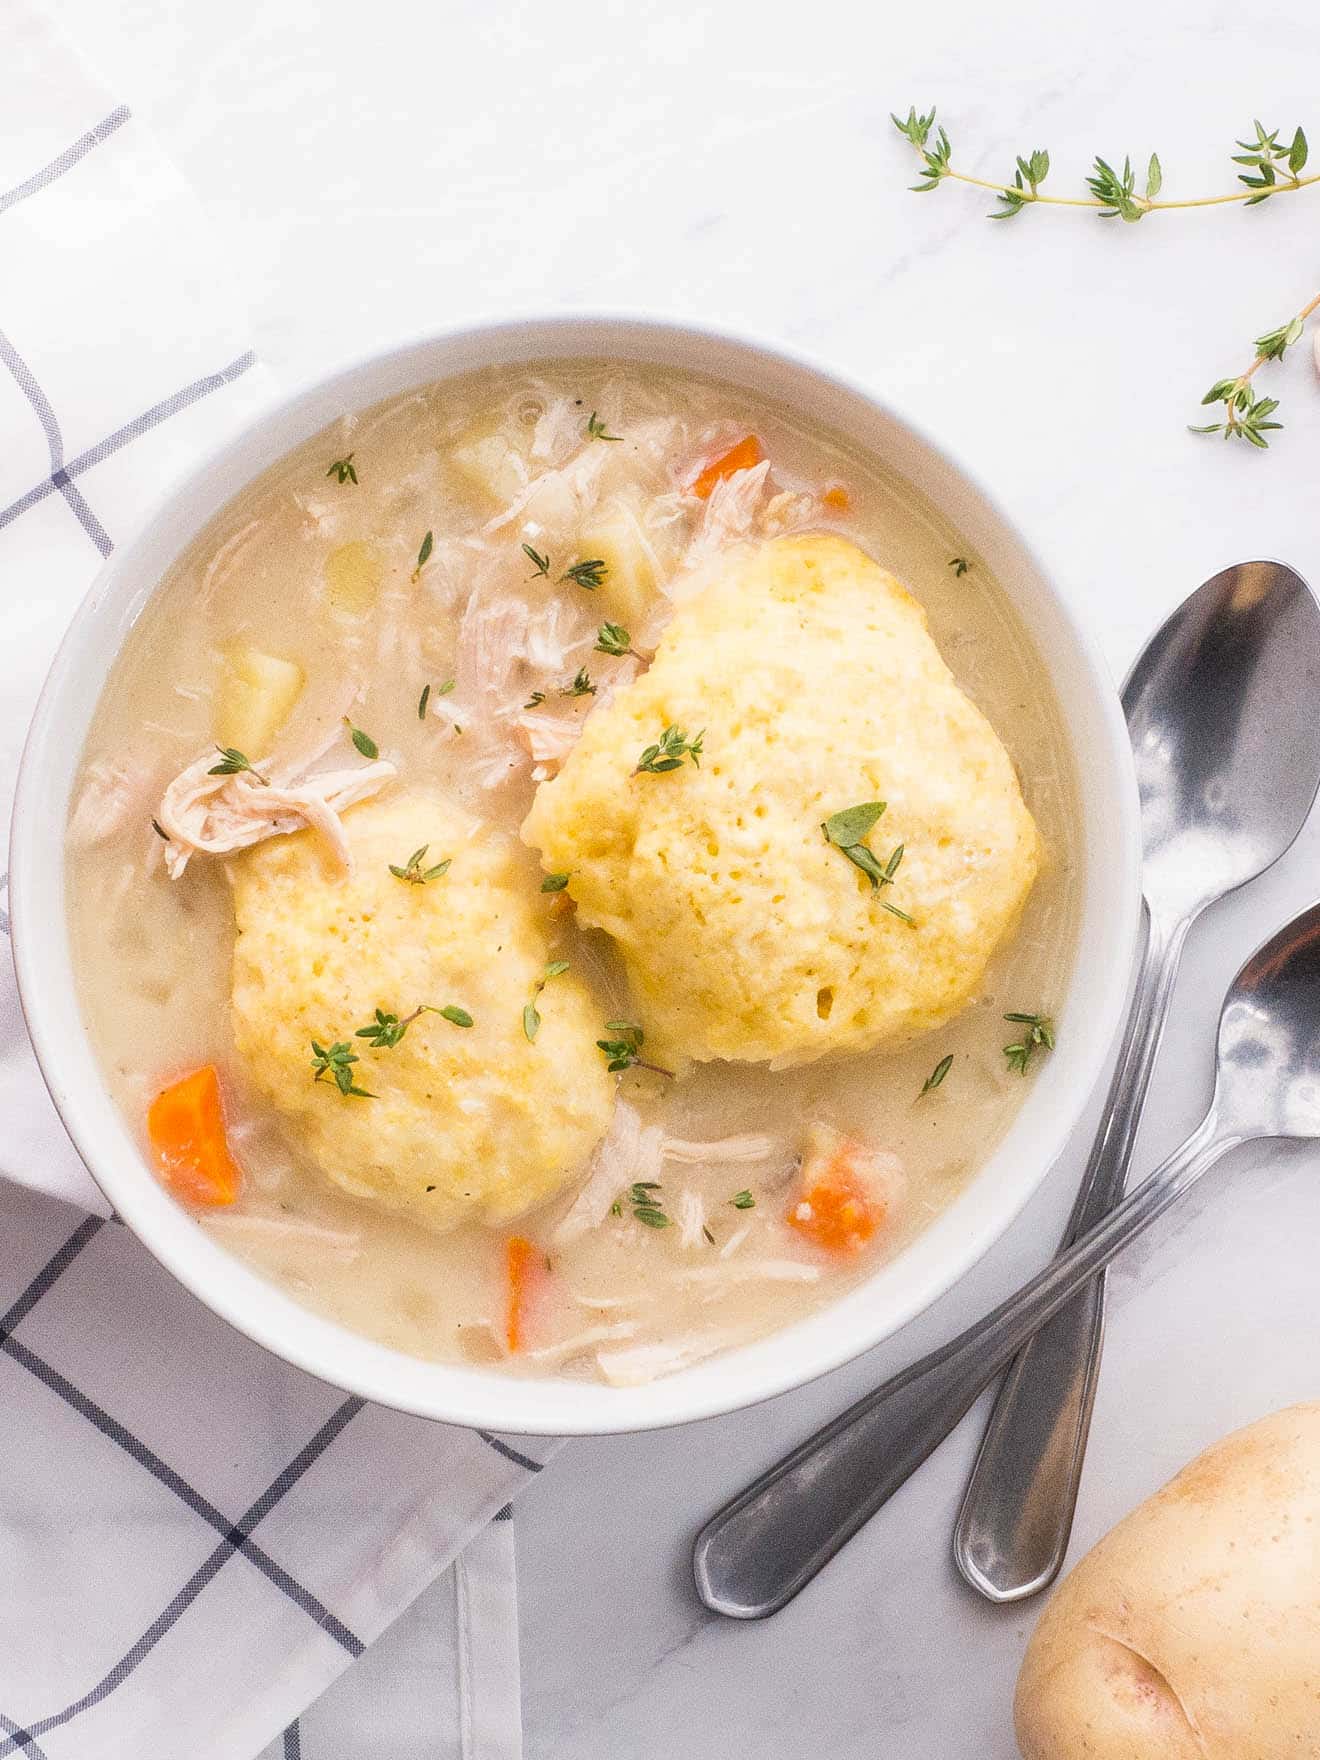 Turkey and Dumplings Soup - Completely Delicious